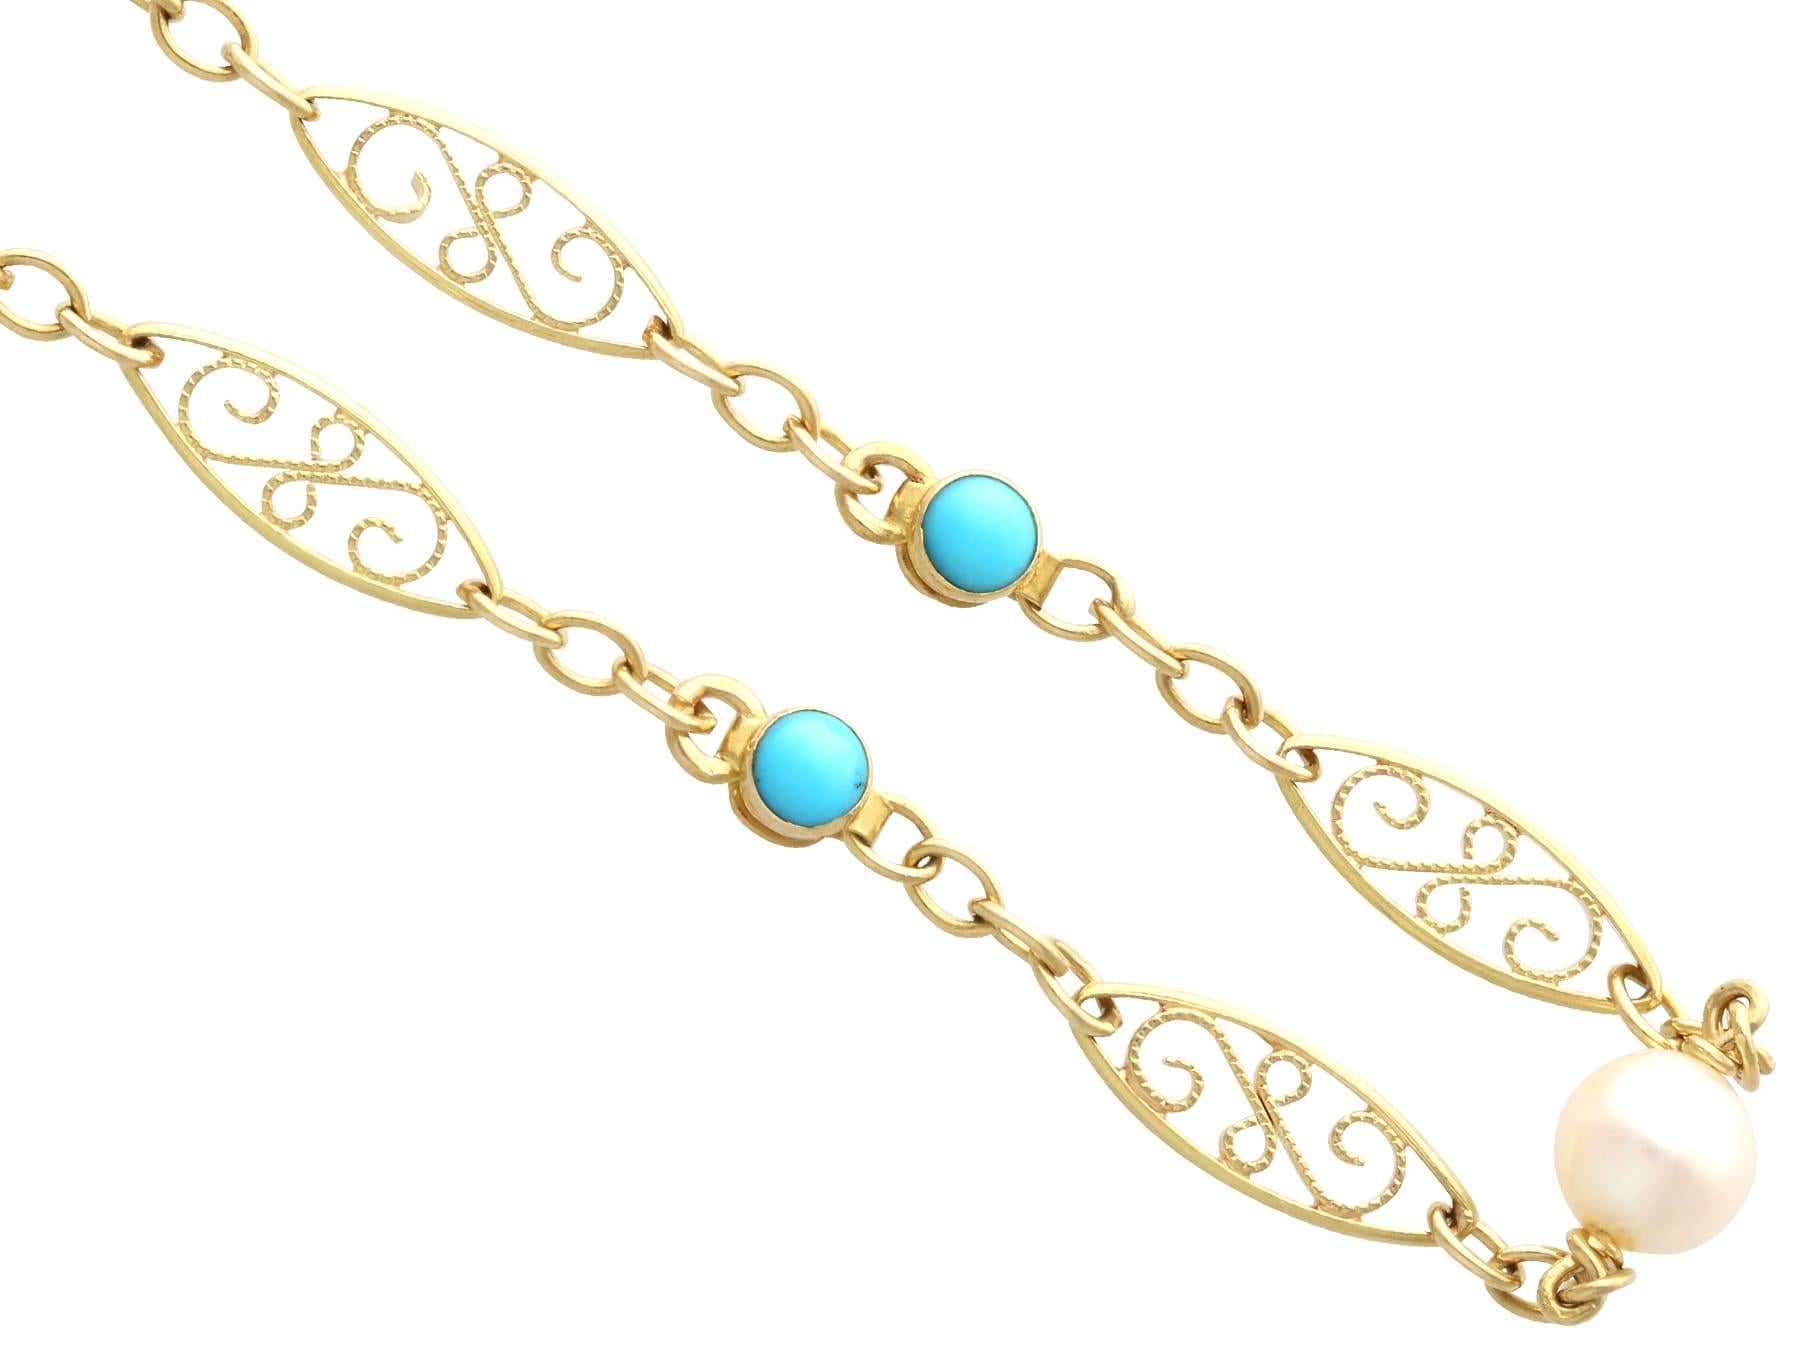 Vintage 3.12 Carat Turquoise and Cultured Pearl 18k Yellow Gold Longuard Chain In Excellent Condition For Sale In Jesmond, Newcastle Upon Tyne